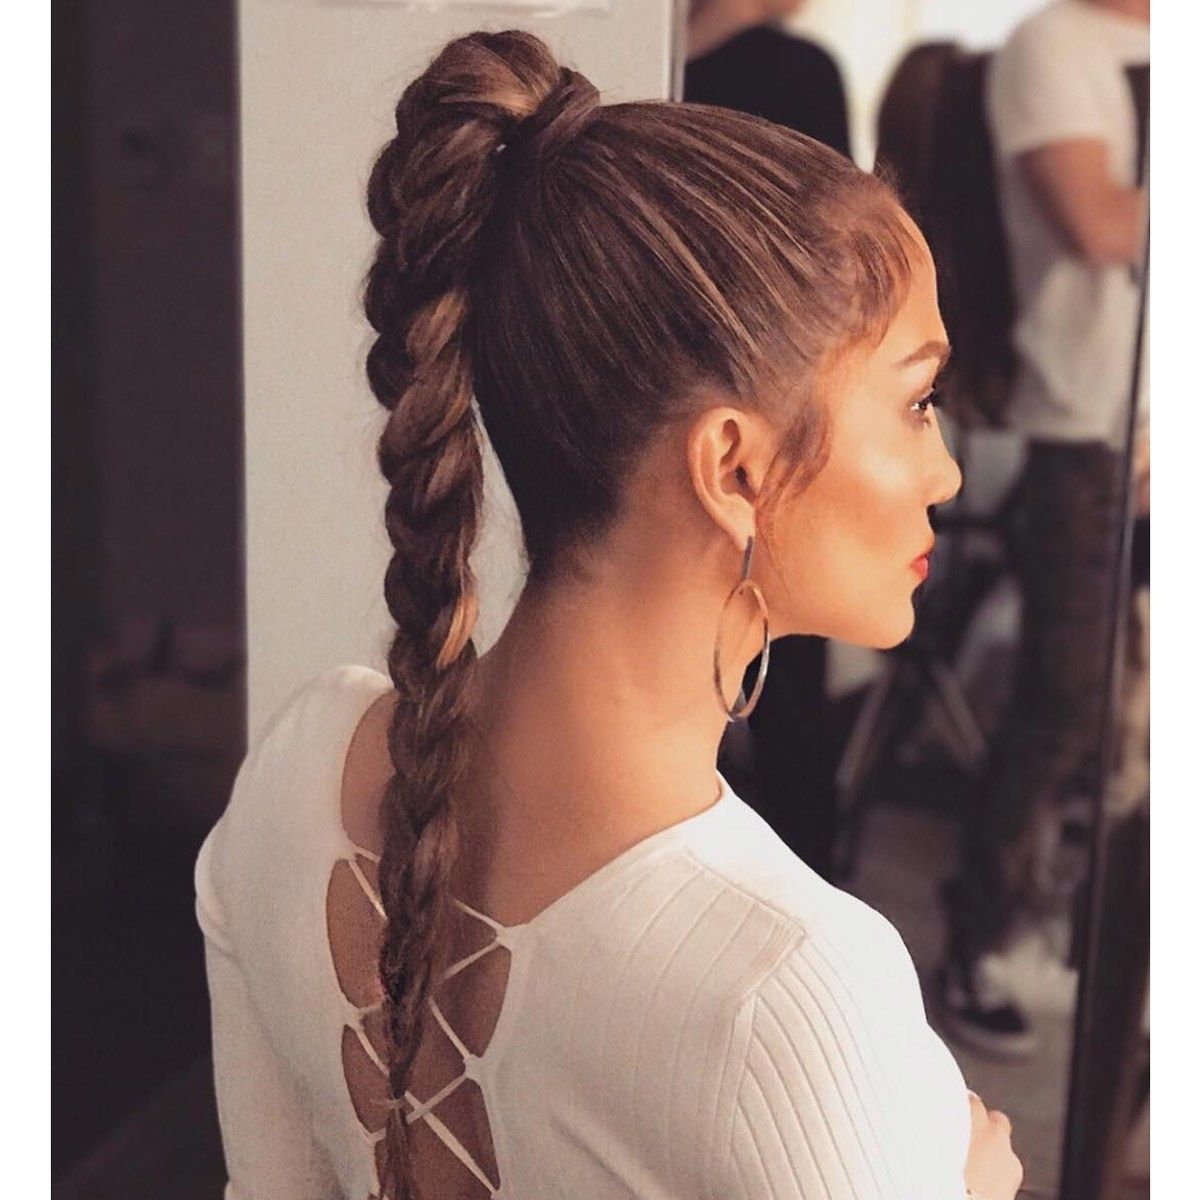 27 Ponytail Hairstyles For 2018: Best Ponytail Styles (View 6 of 20)